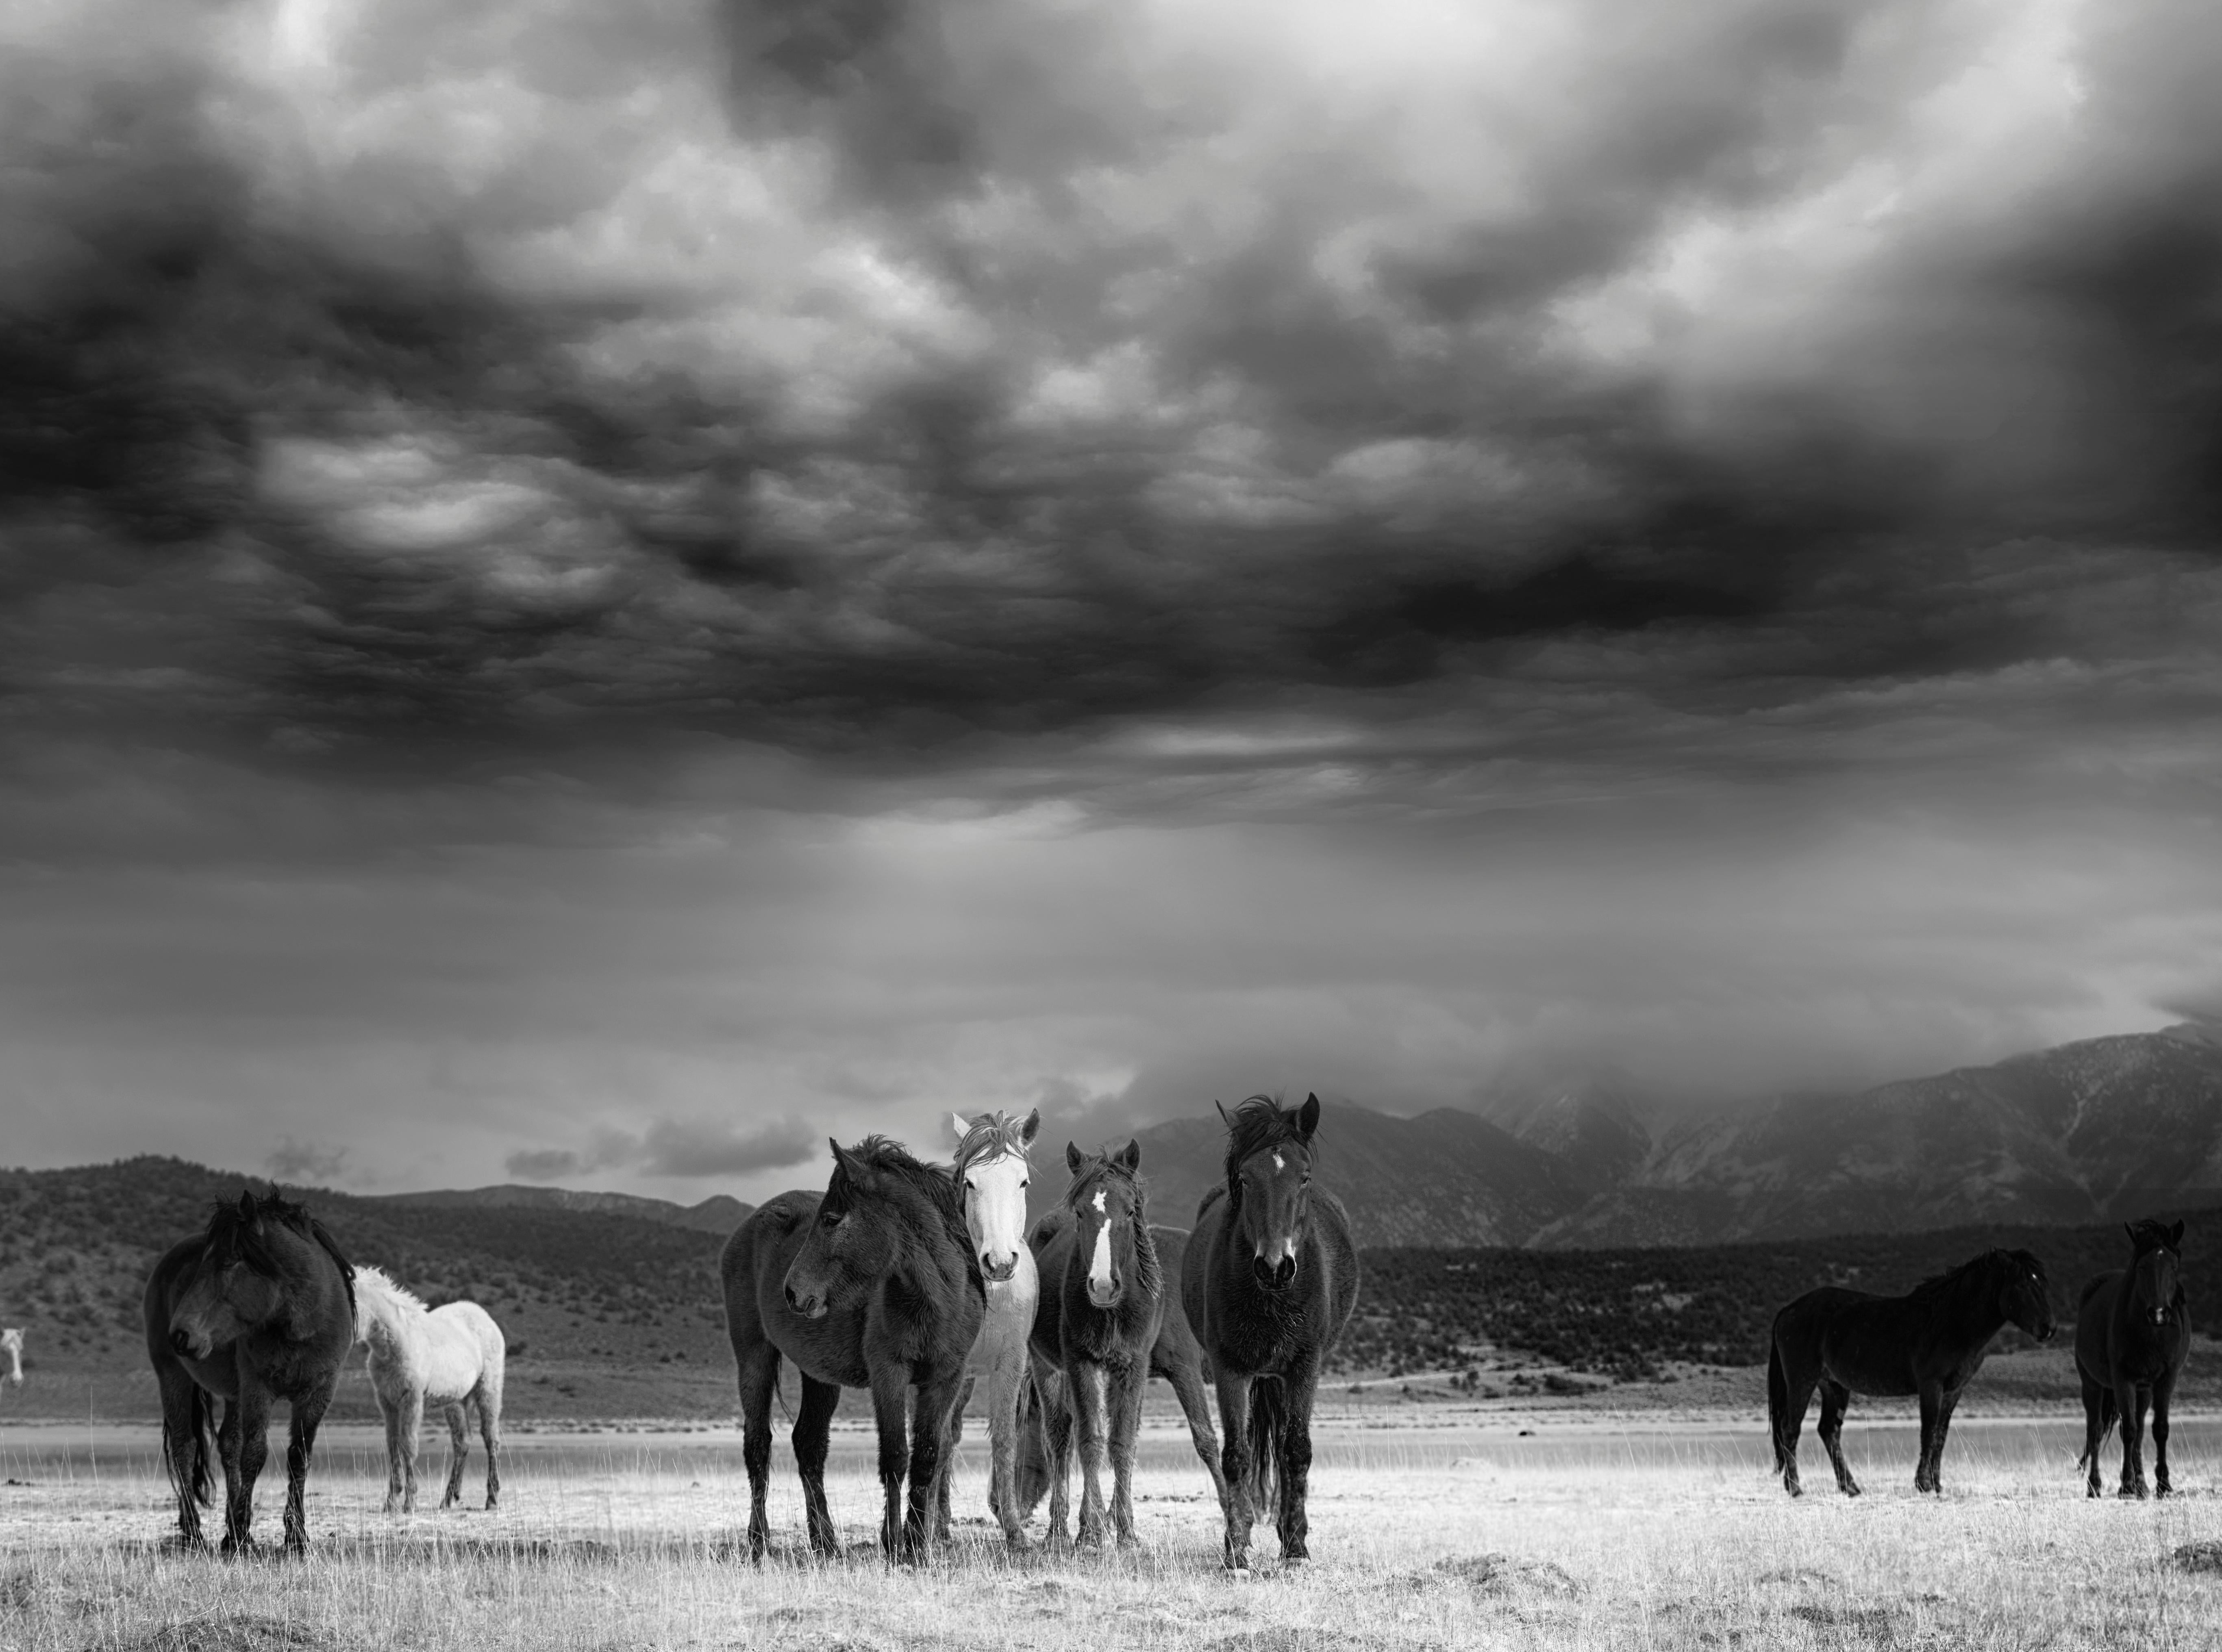 Shane Russeck Animal Print - 36x48 "The Calm"  Black and White Photography of Wild Horses, Mustangs Fine Art 